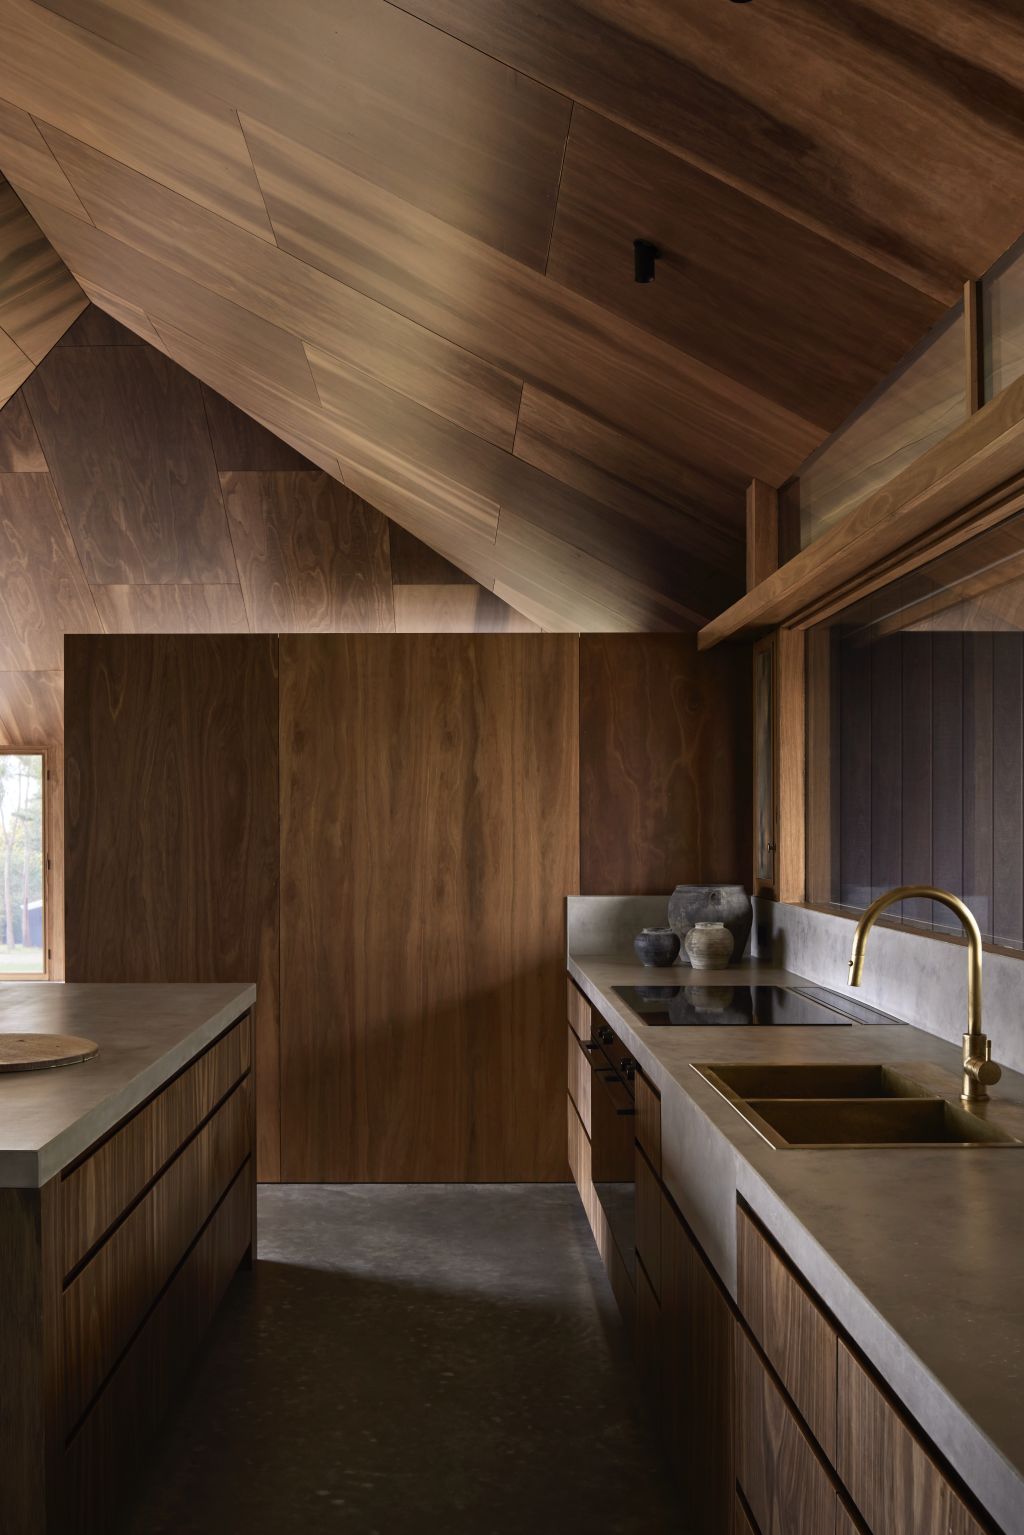 One of three kitchens on the property. Photo: SHARYN CAIRNS PHOTOGRAPHY